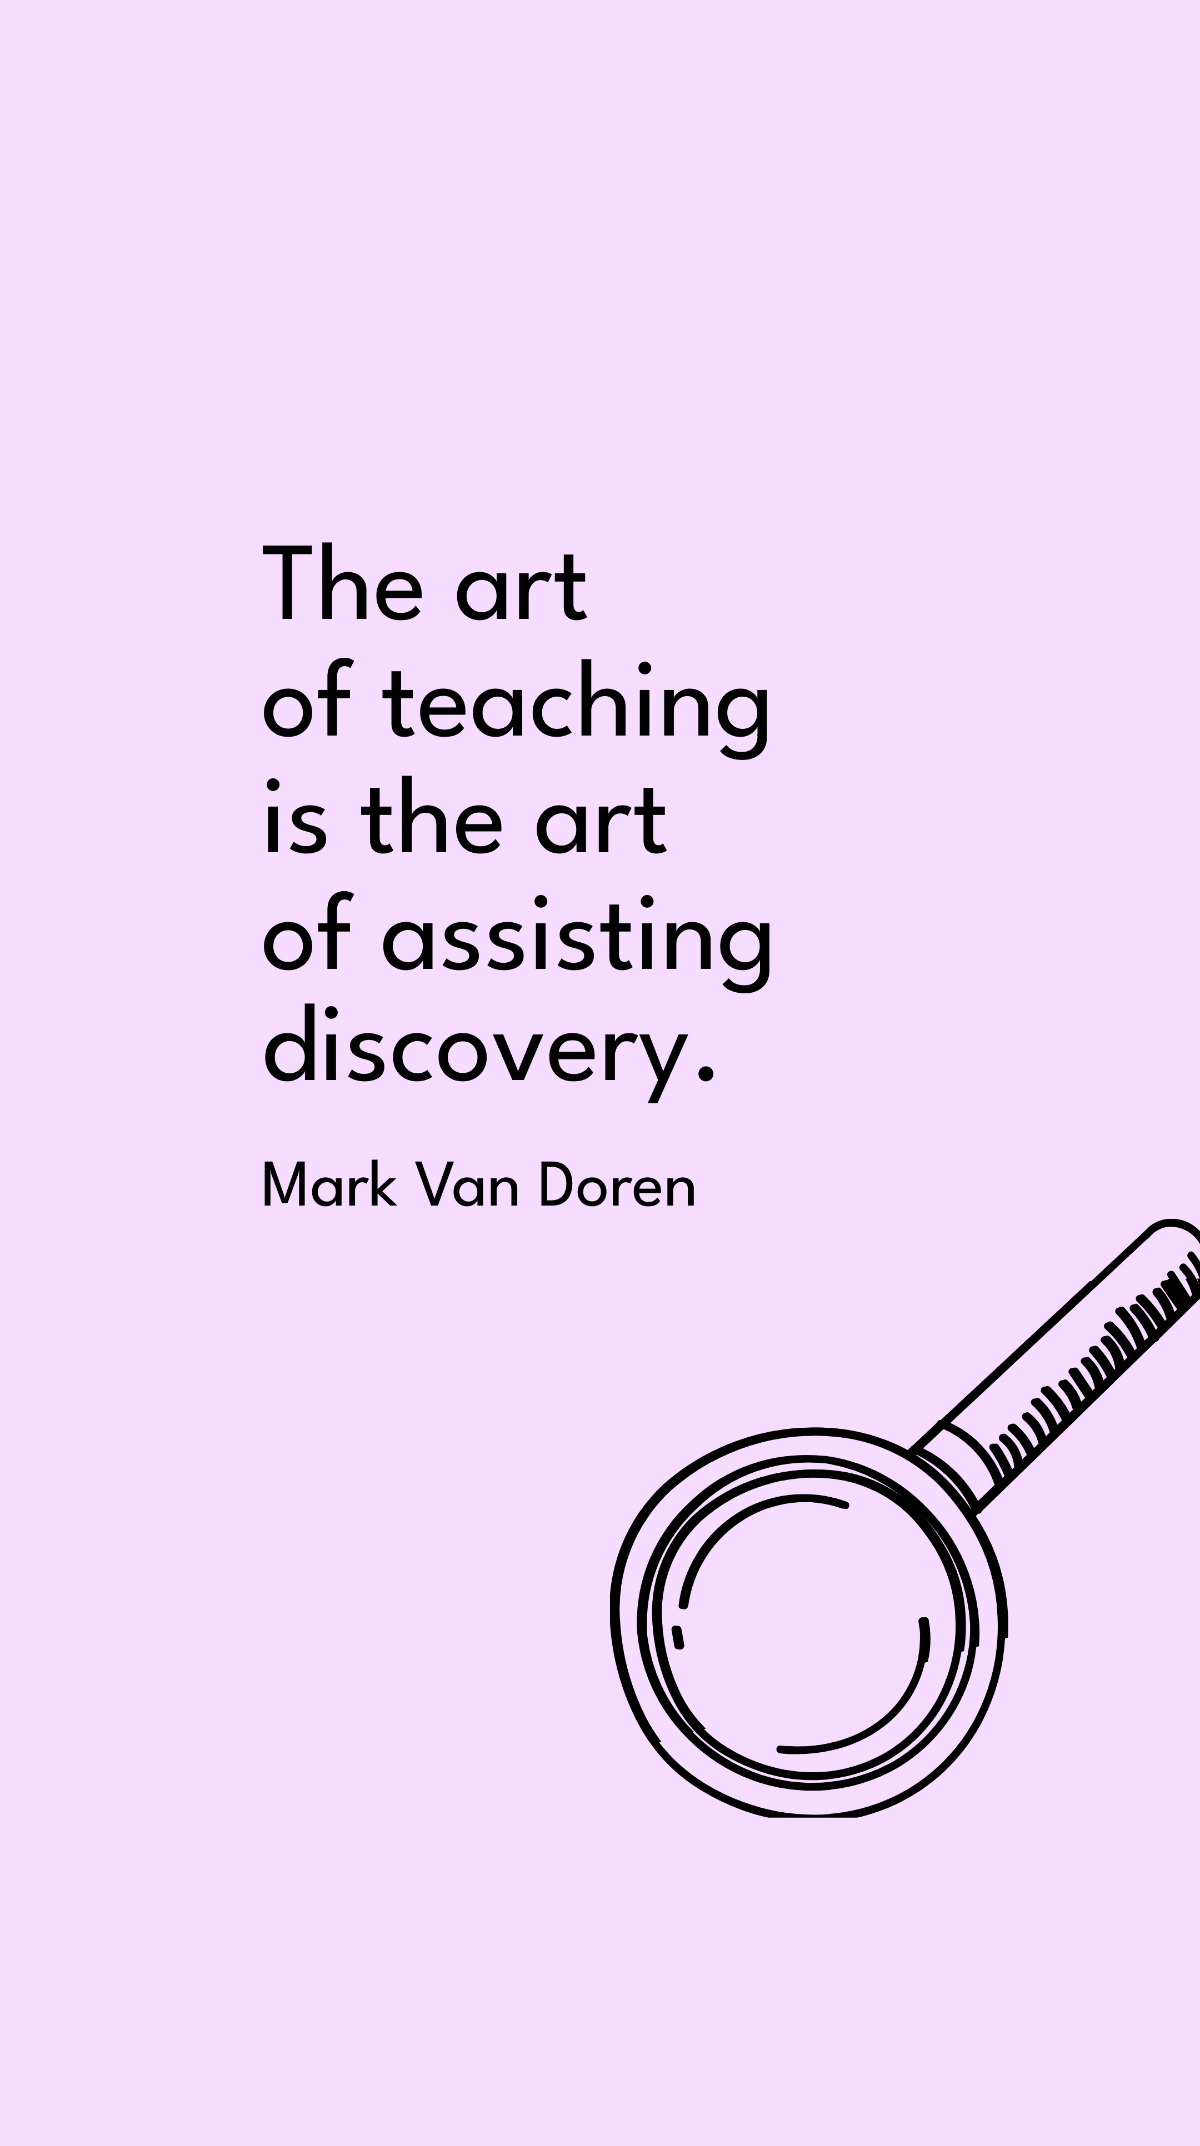 Free Mark Van Doren - The art of teaching is the art of assisting discovery. Template